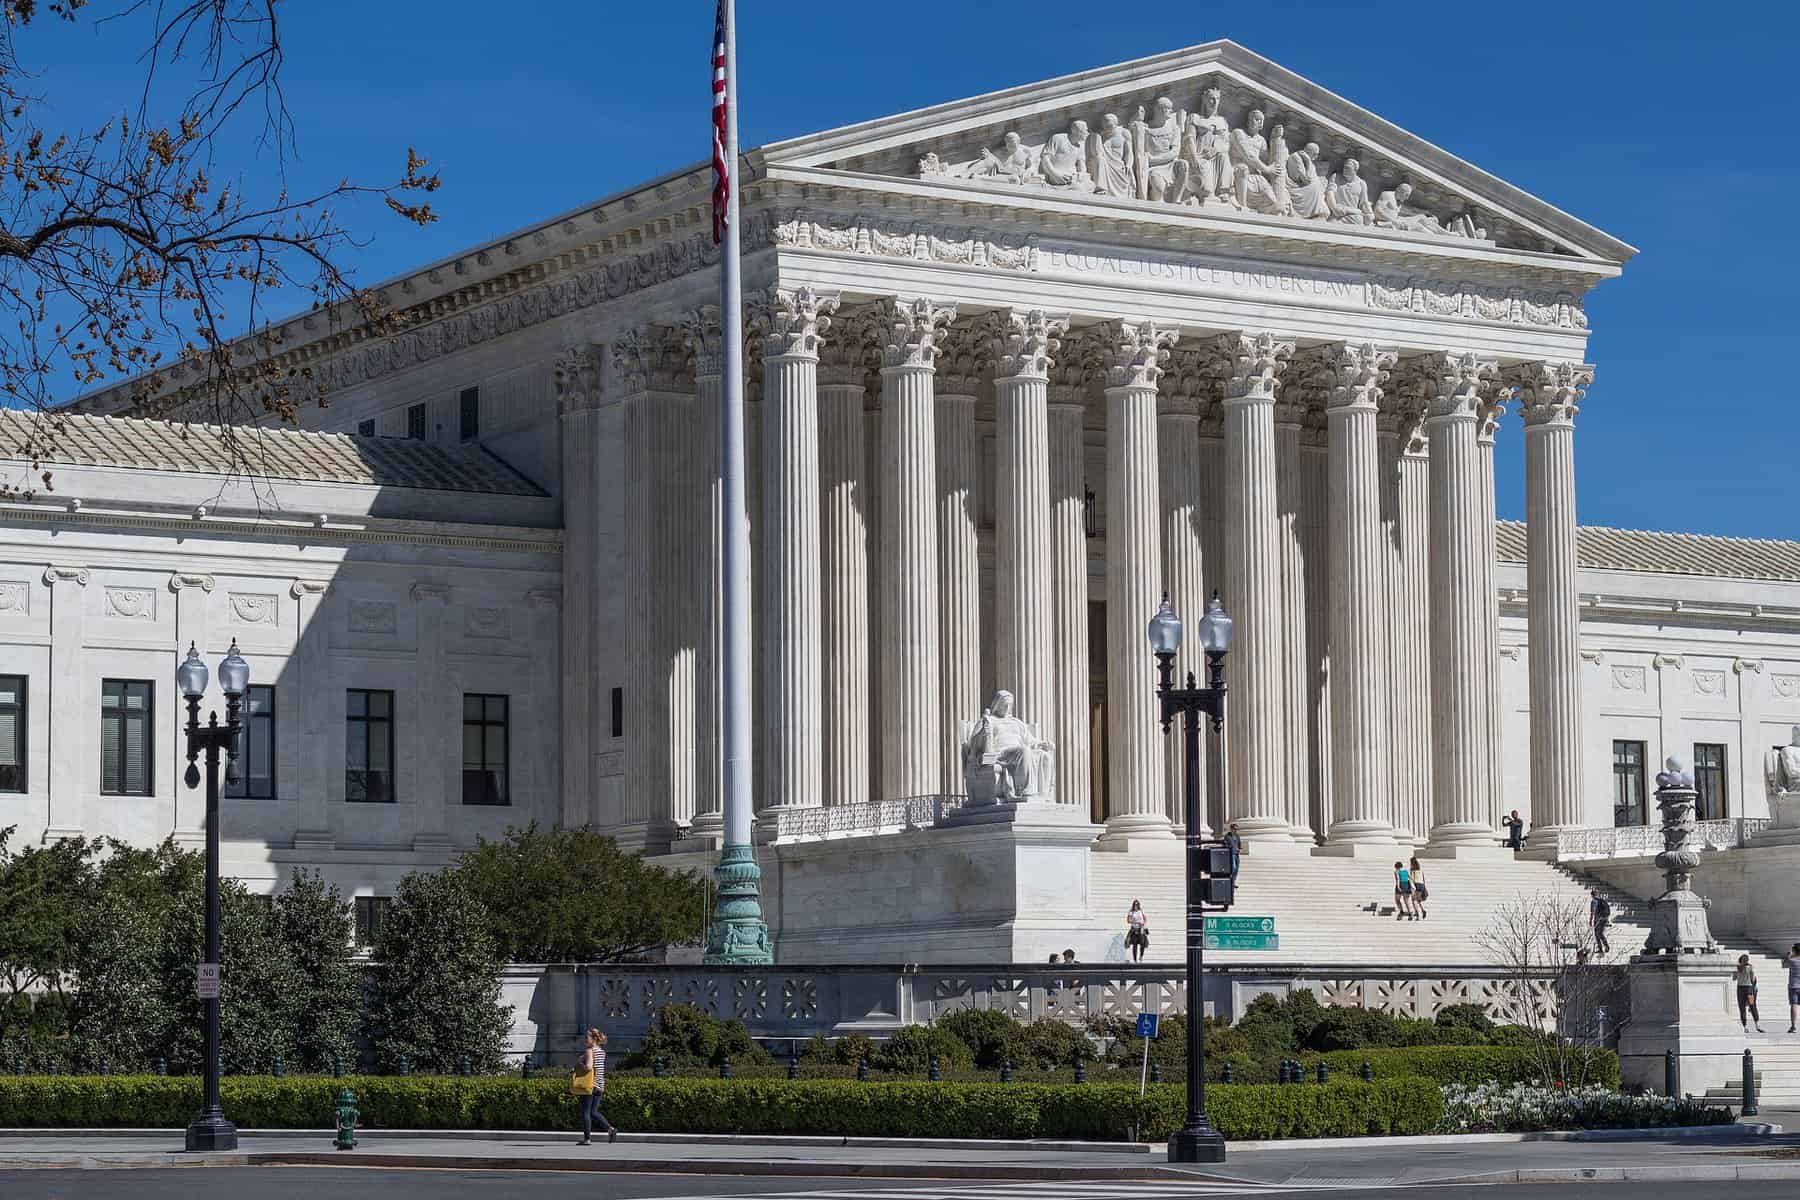 The US Supreme Court building is seen from the street at an angle on a clear day.